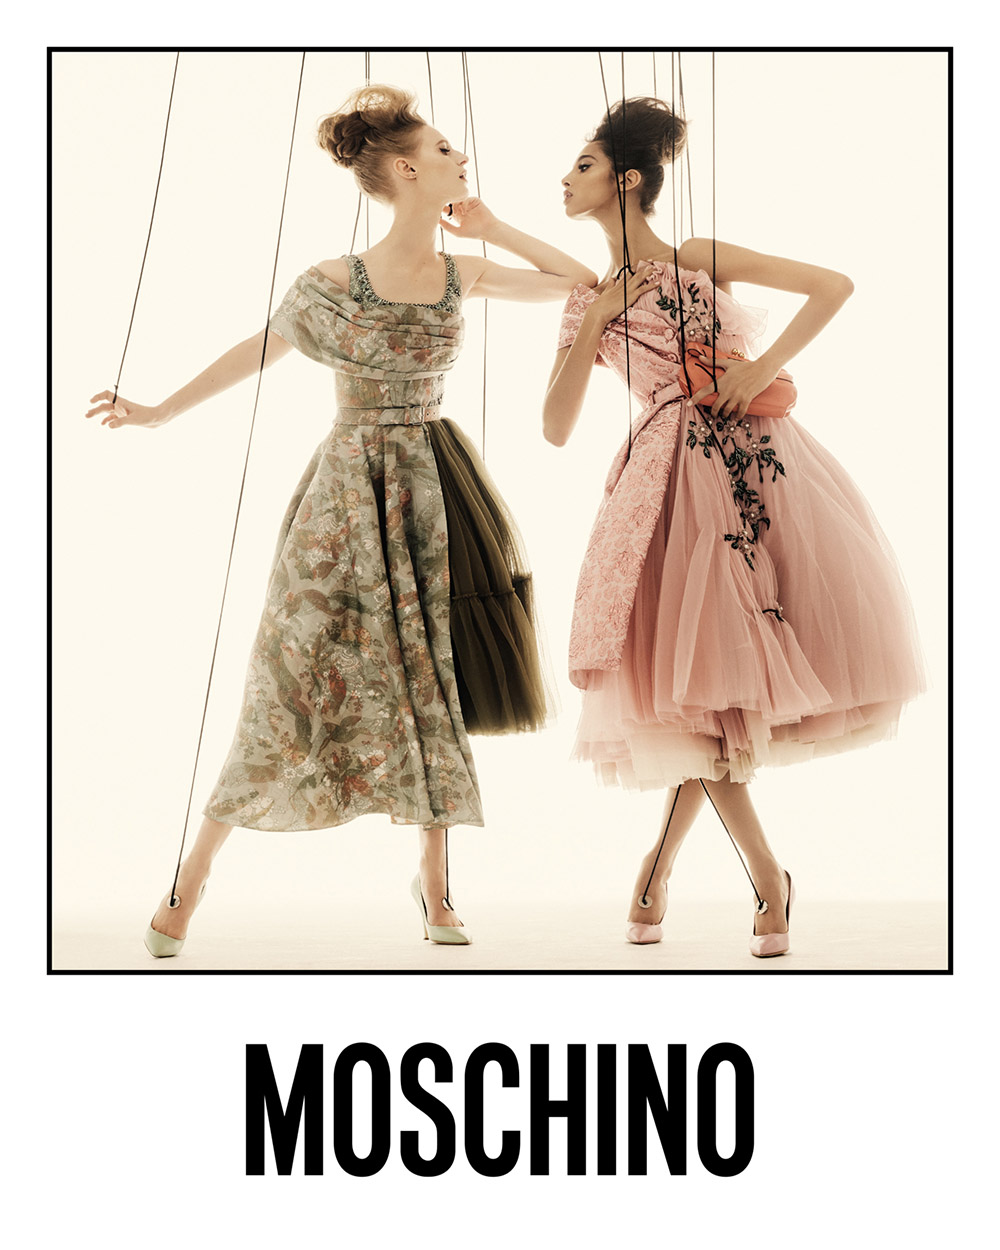 Moschino Spring Summer 2021 Campaign